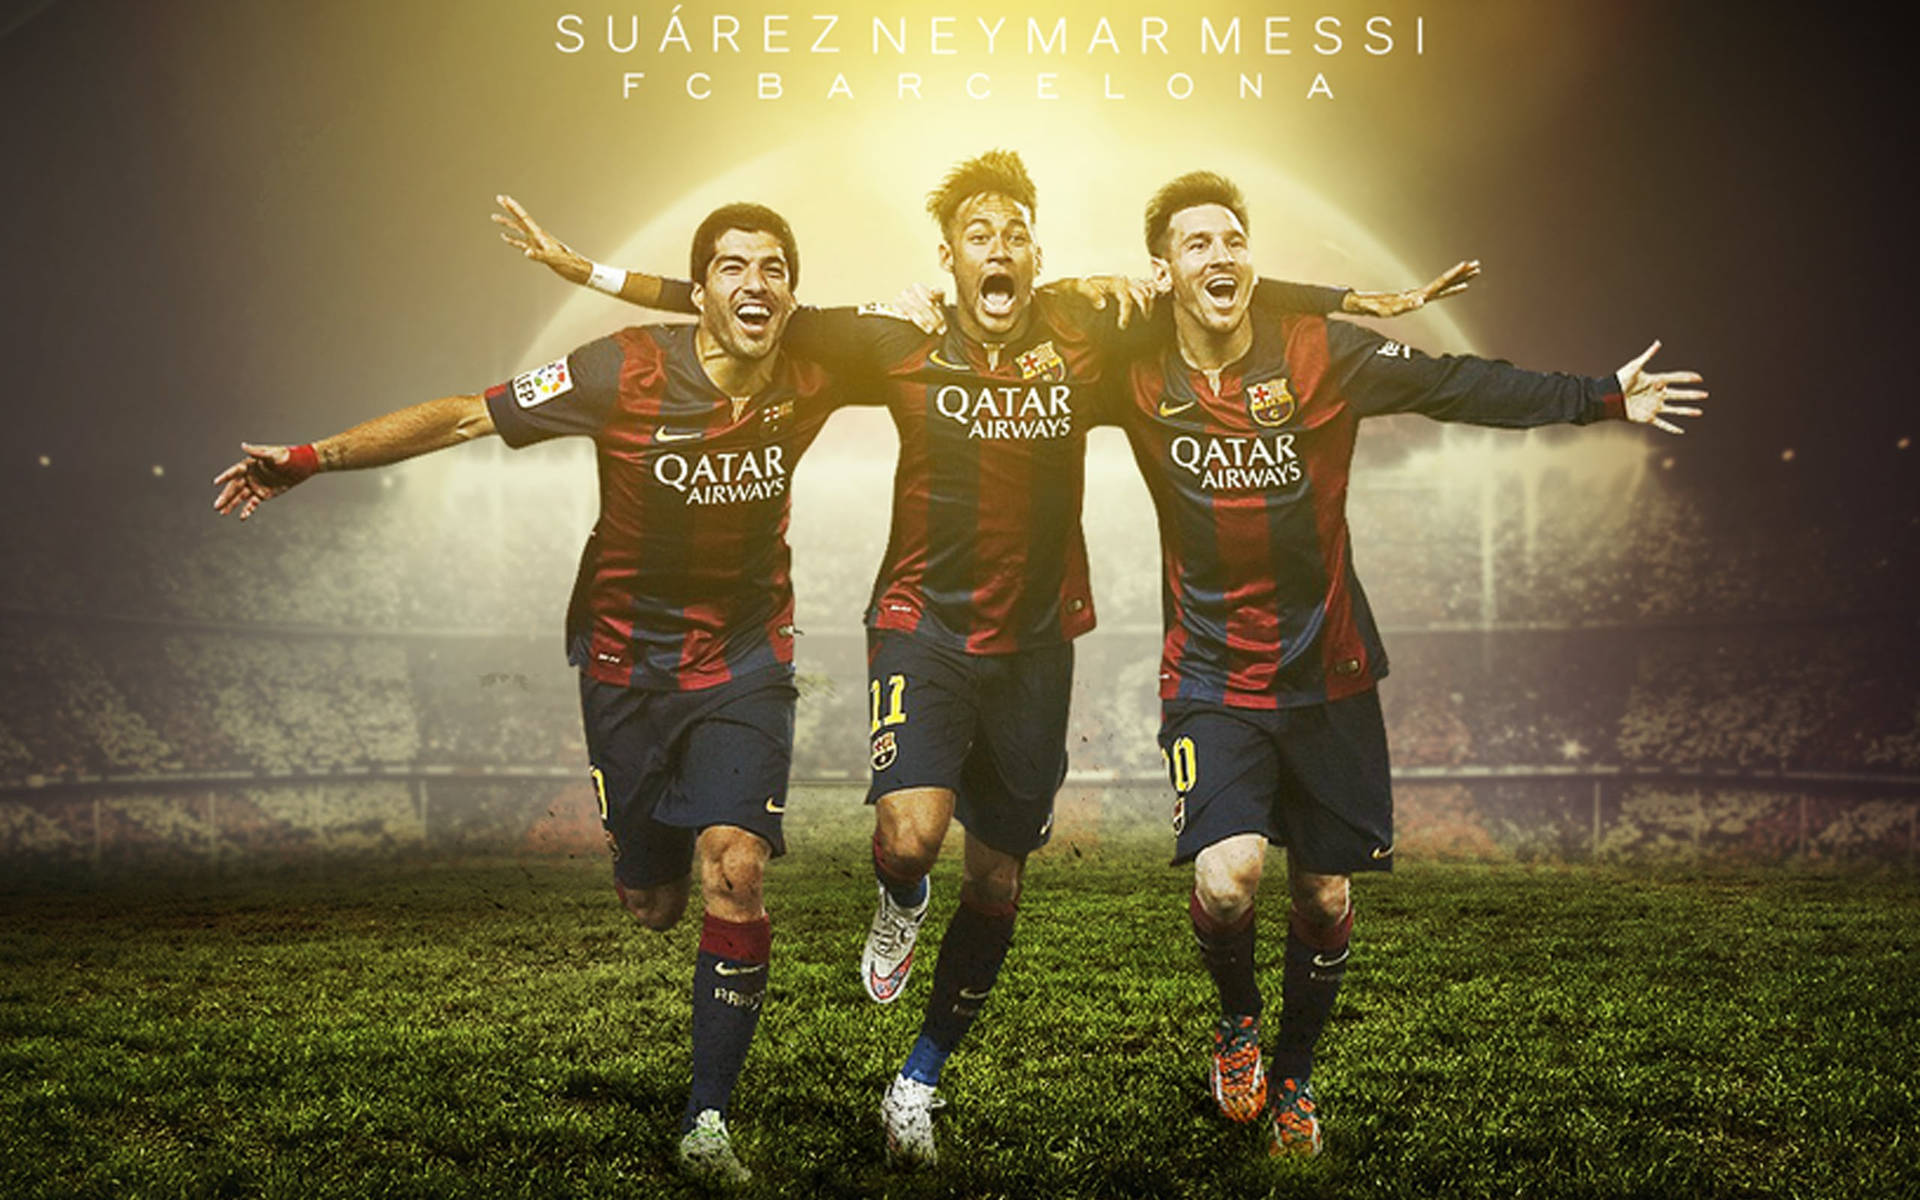 Lionel Messi, Luis Suarez and Neymar Jr. of FC Barcelona in a match. Wallpaper